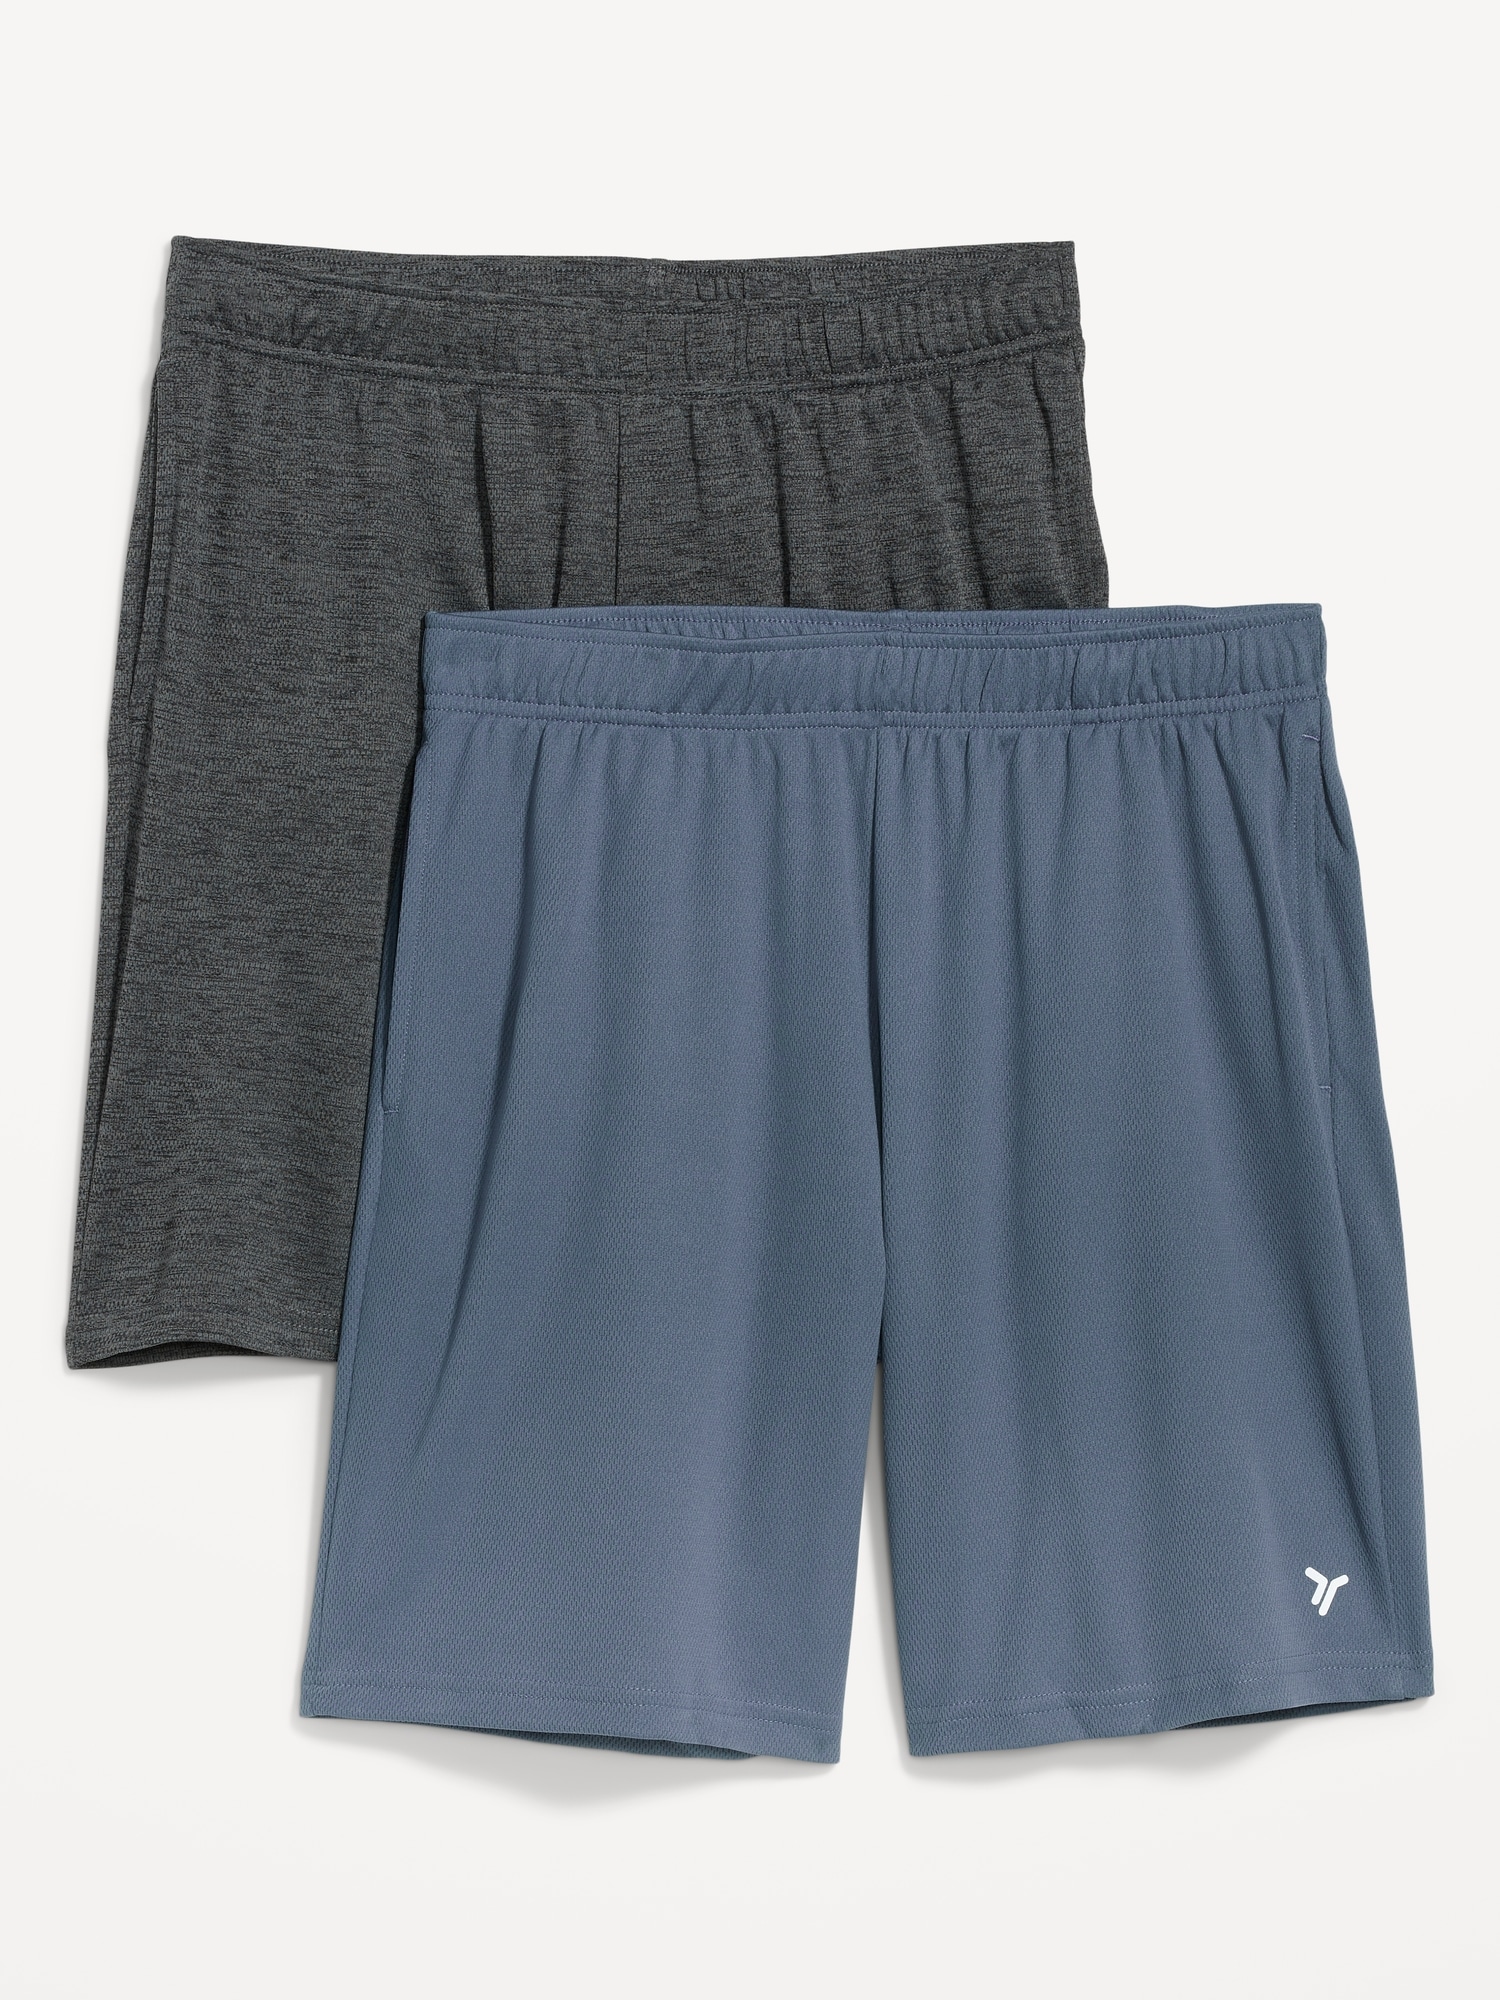 Old Navy Go-Dry Mesh Performance Shorts 2-Pack for Men -- 9-inch inseam blue. 1